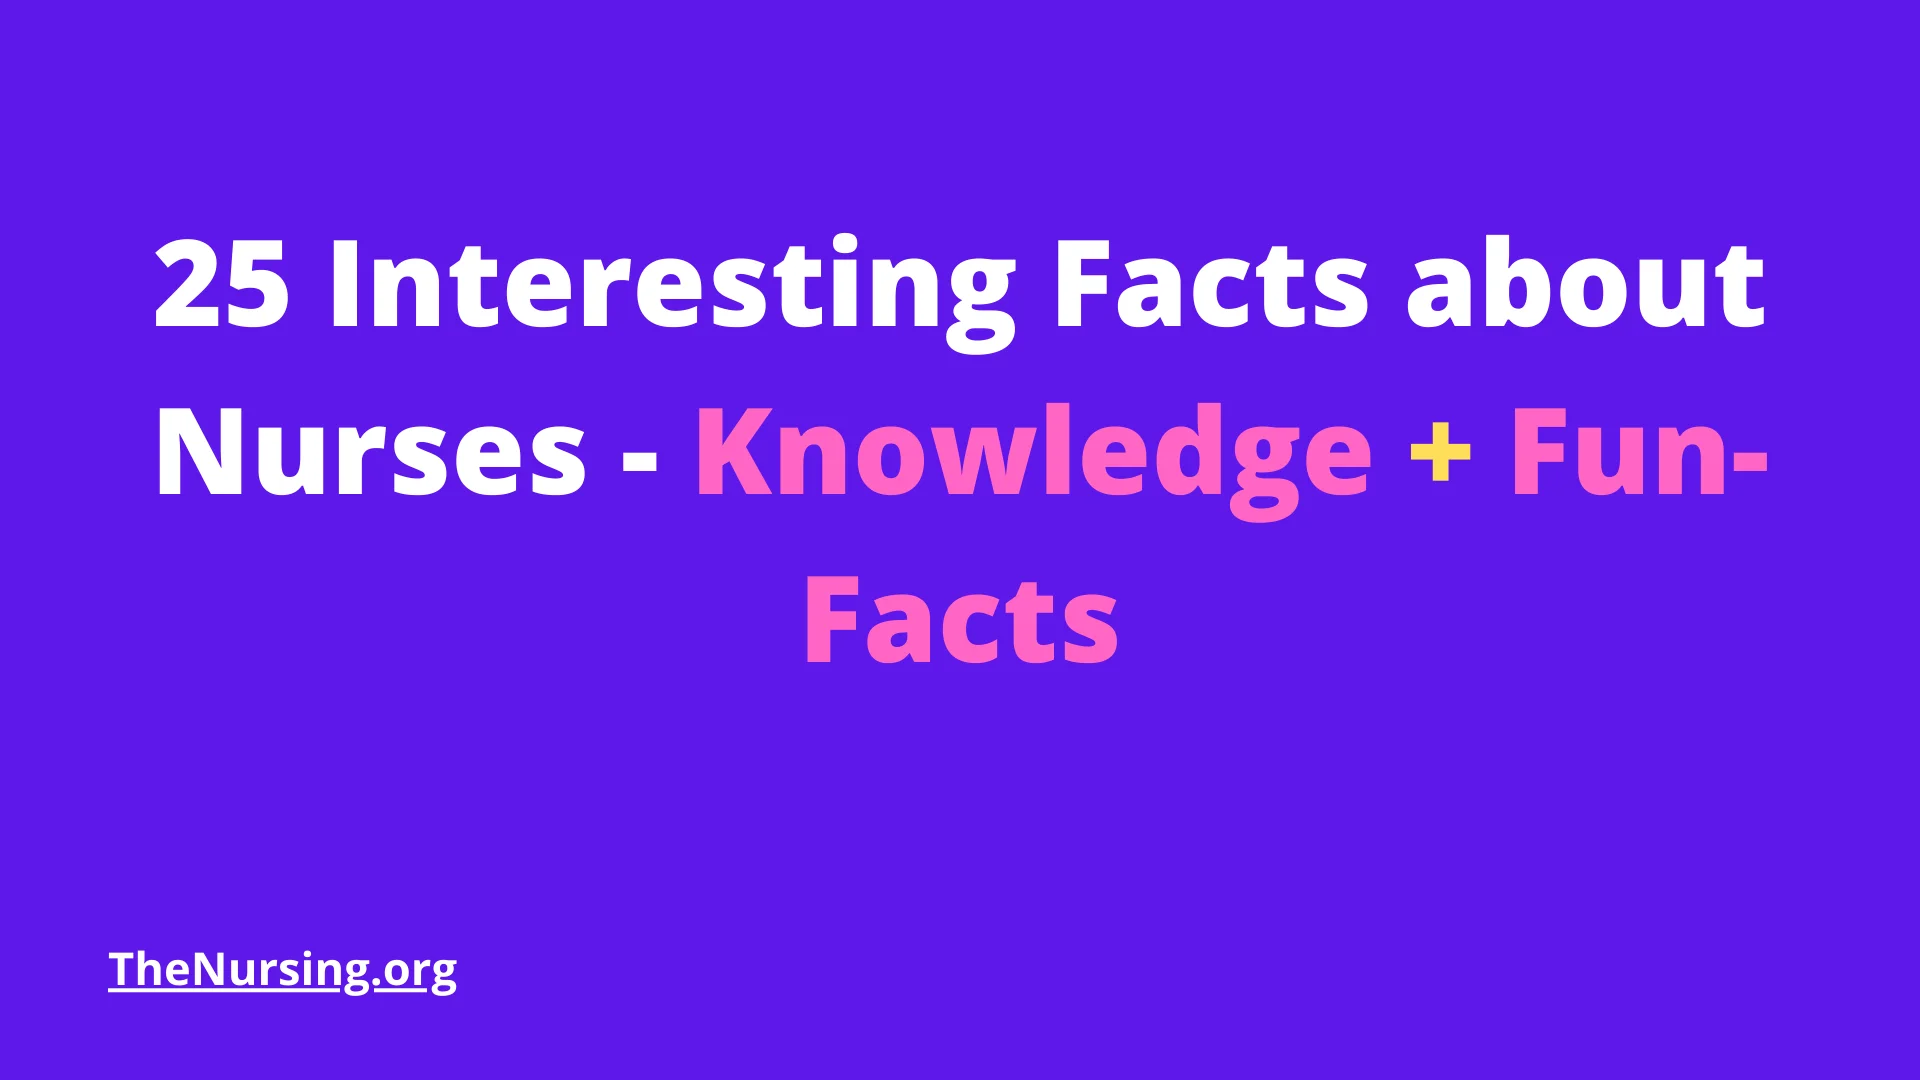 25-Interesting-Facts-about-Nurses-Knowledge-Fun-Facts.webp